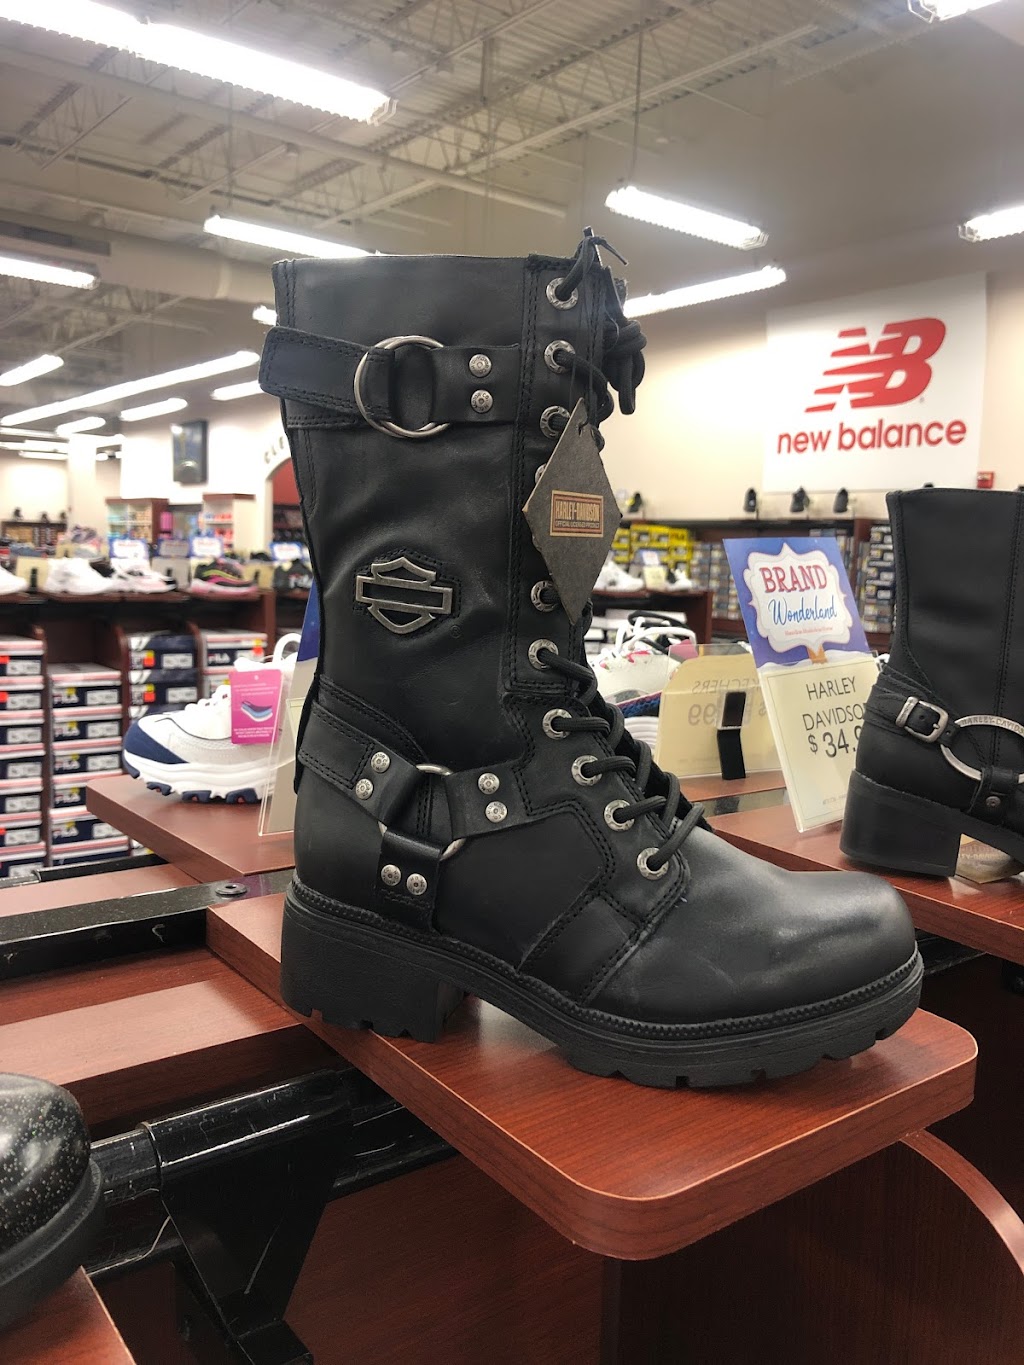 Shoe Dept. Encore | 9409 US Highway 19 Gulf View Square, Ste 107A, Port Richey, FL 34668, USA | Phone: (727) 842-9315